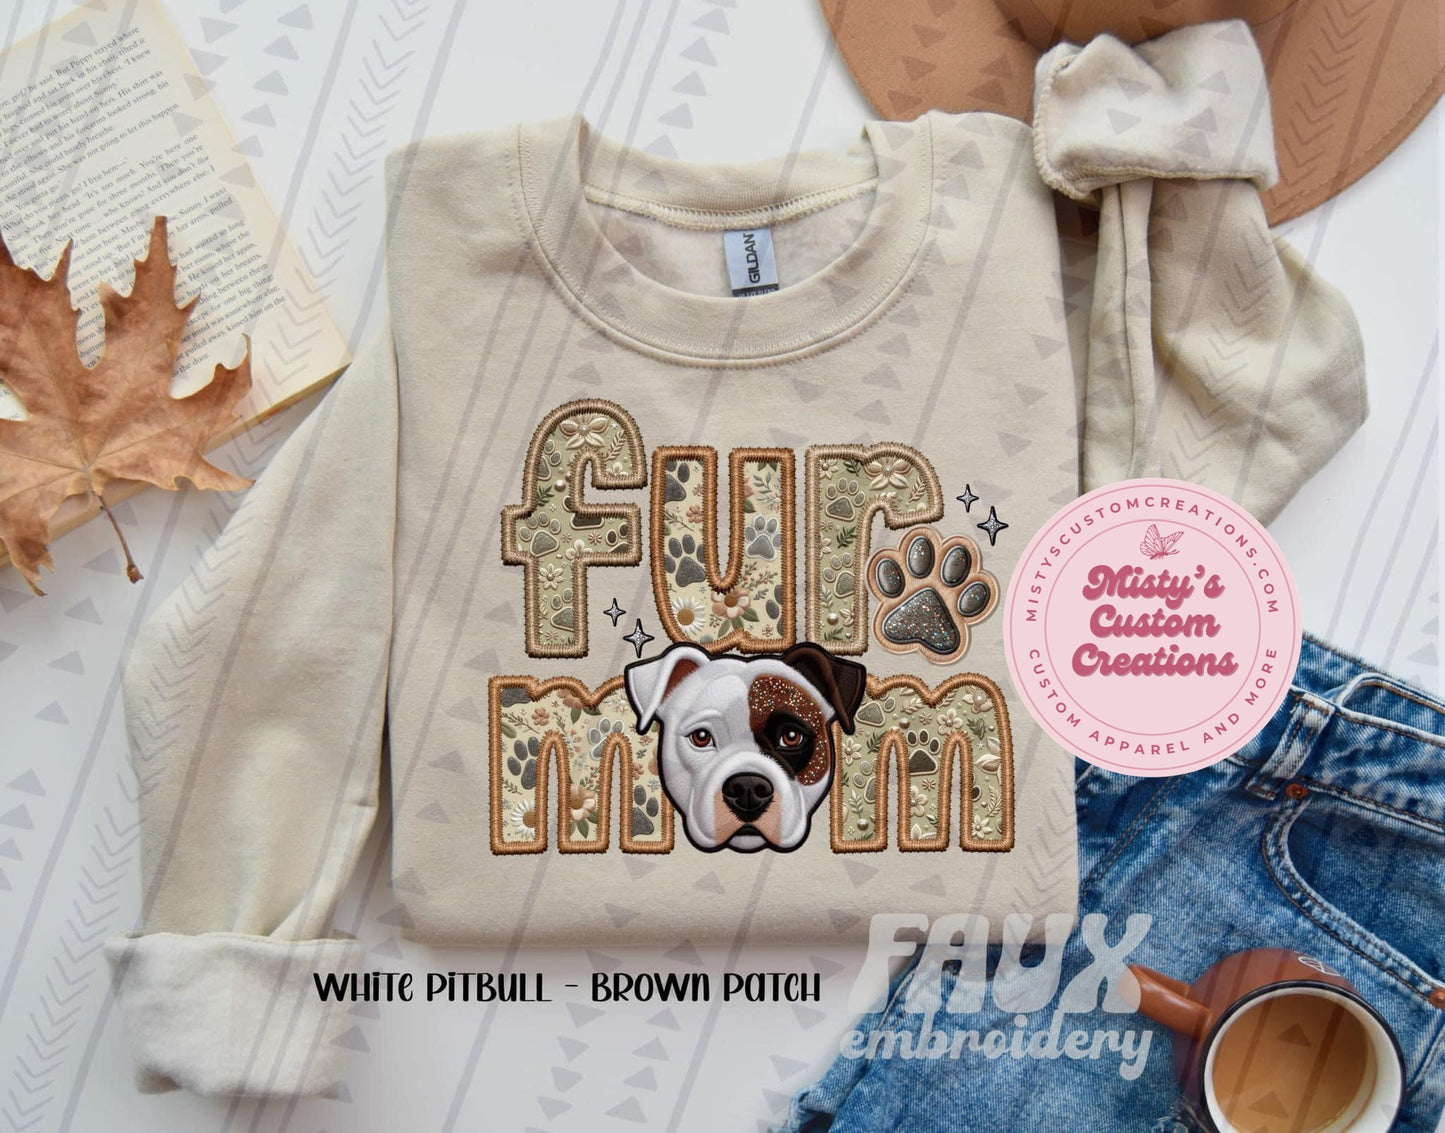 Pit bull White Brown Patch Fur Mom